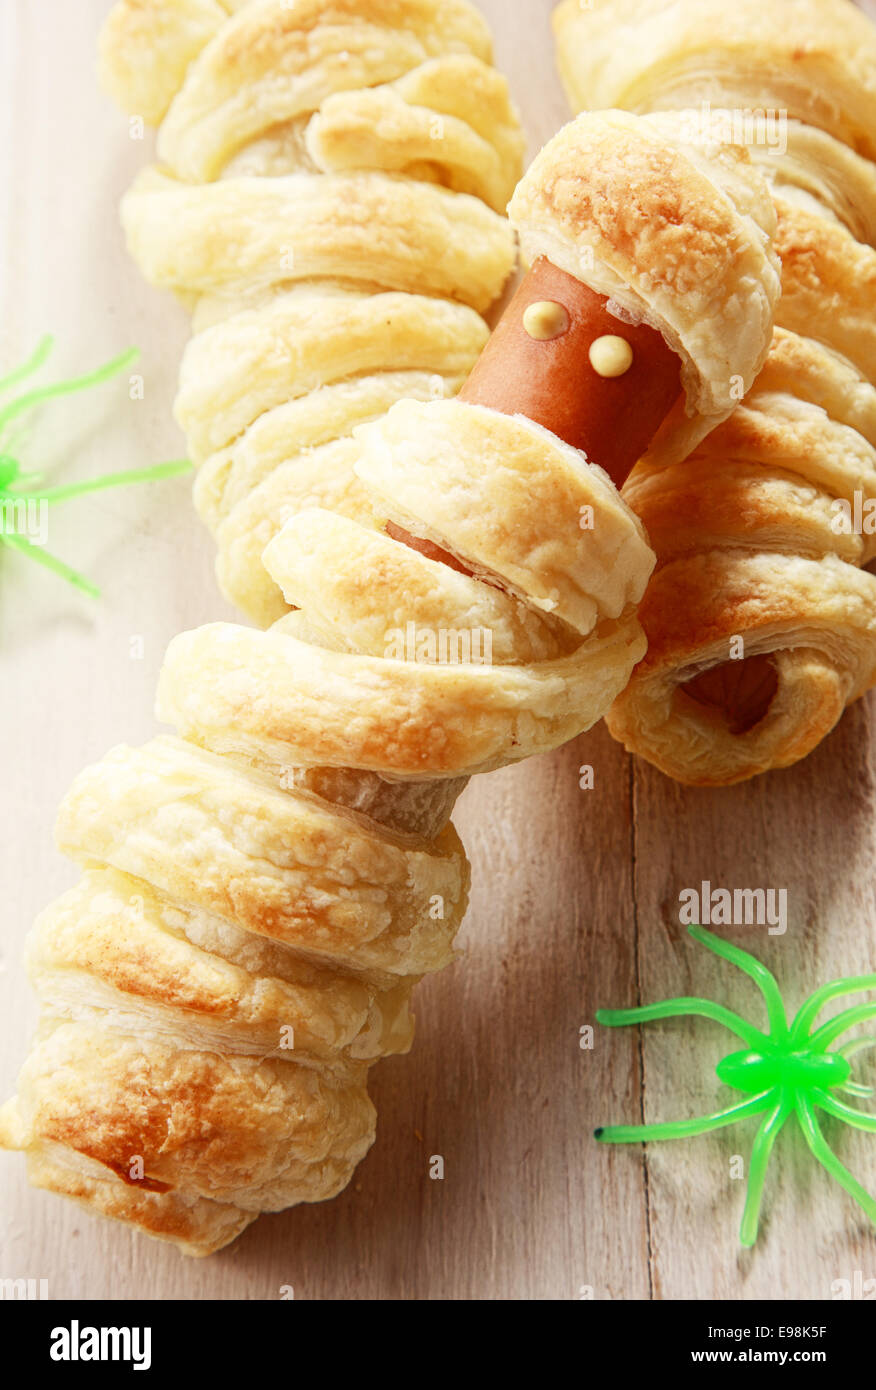 Halloween Appetizer of Weiner Wrapped in Pastry to Look Like a Mummy Stock Photo